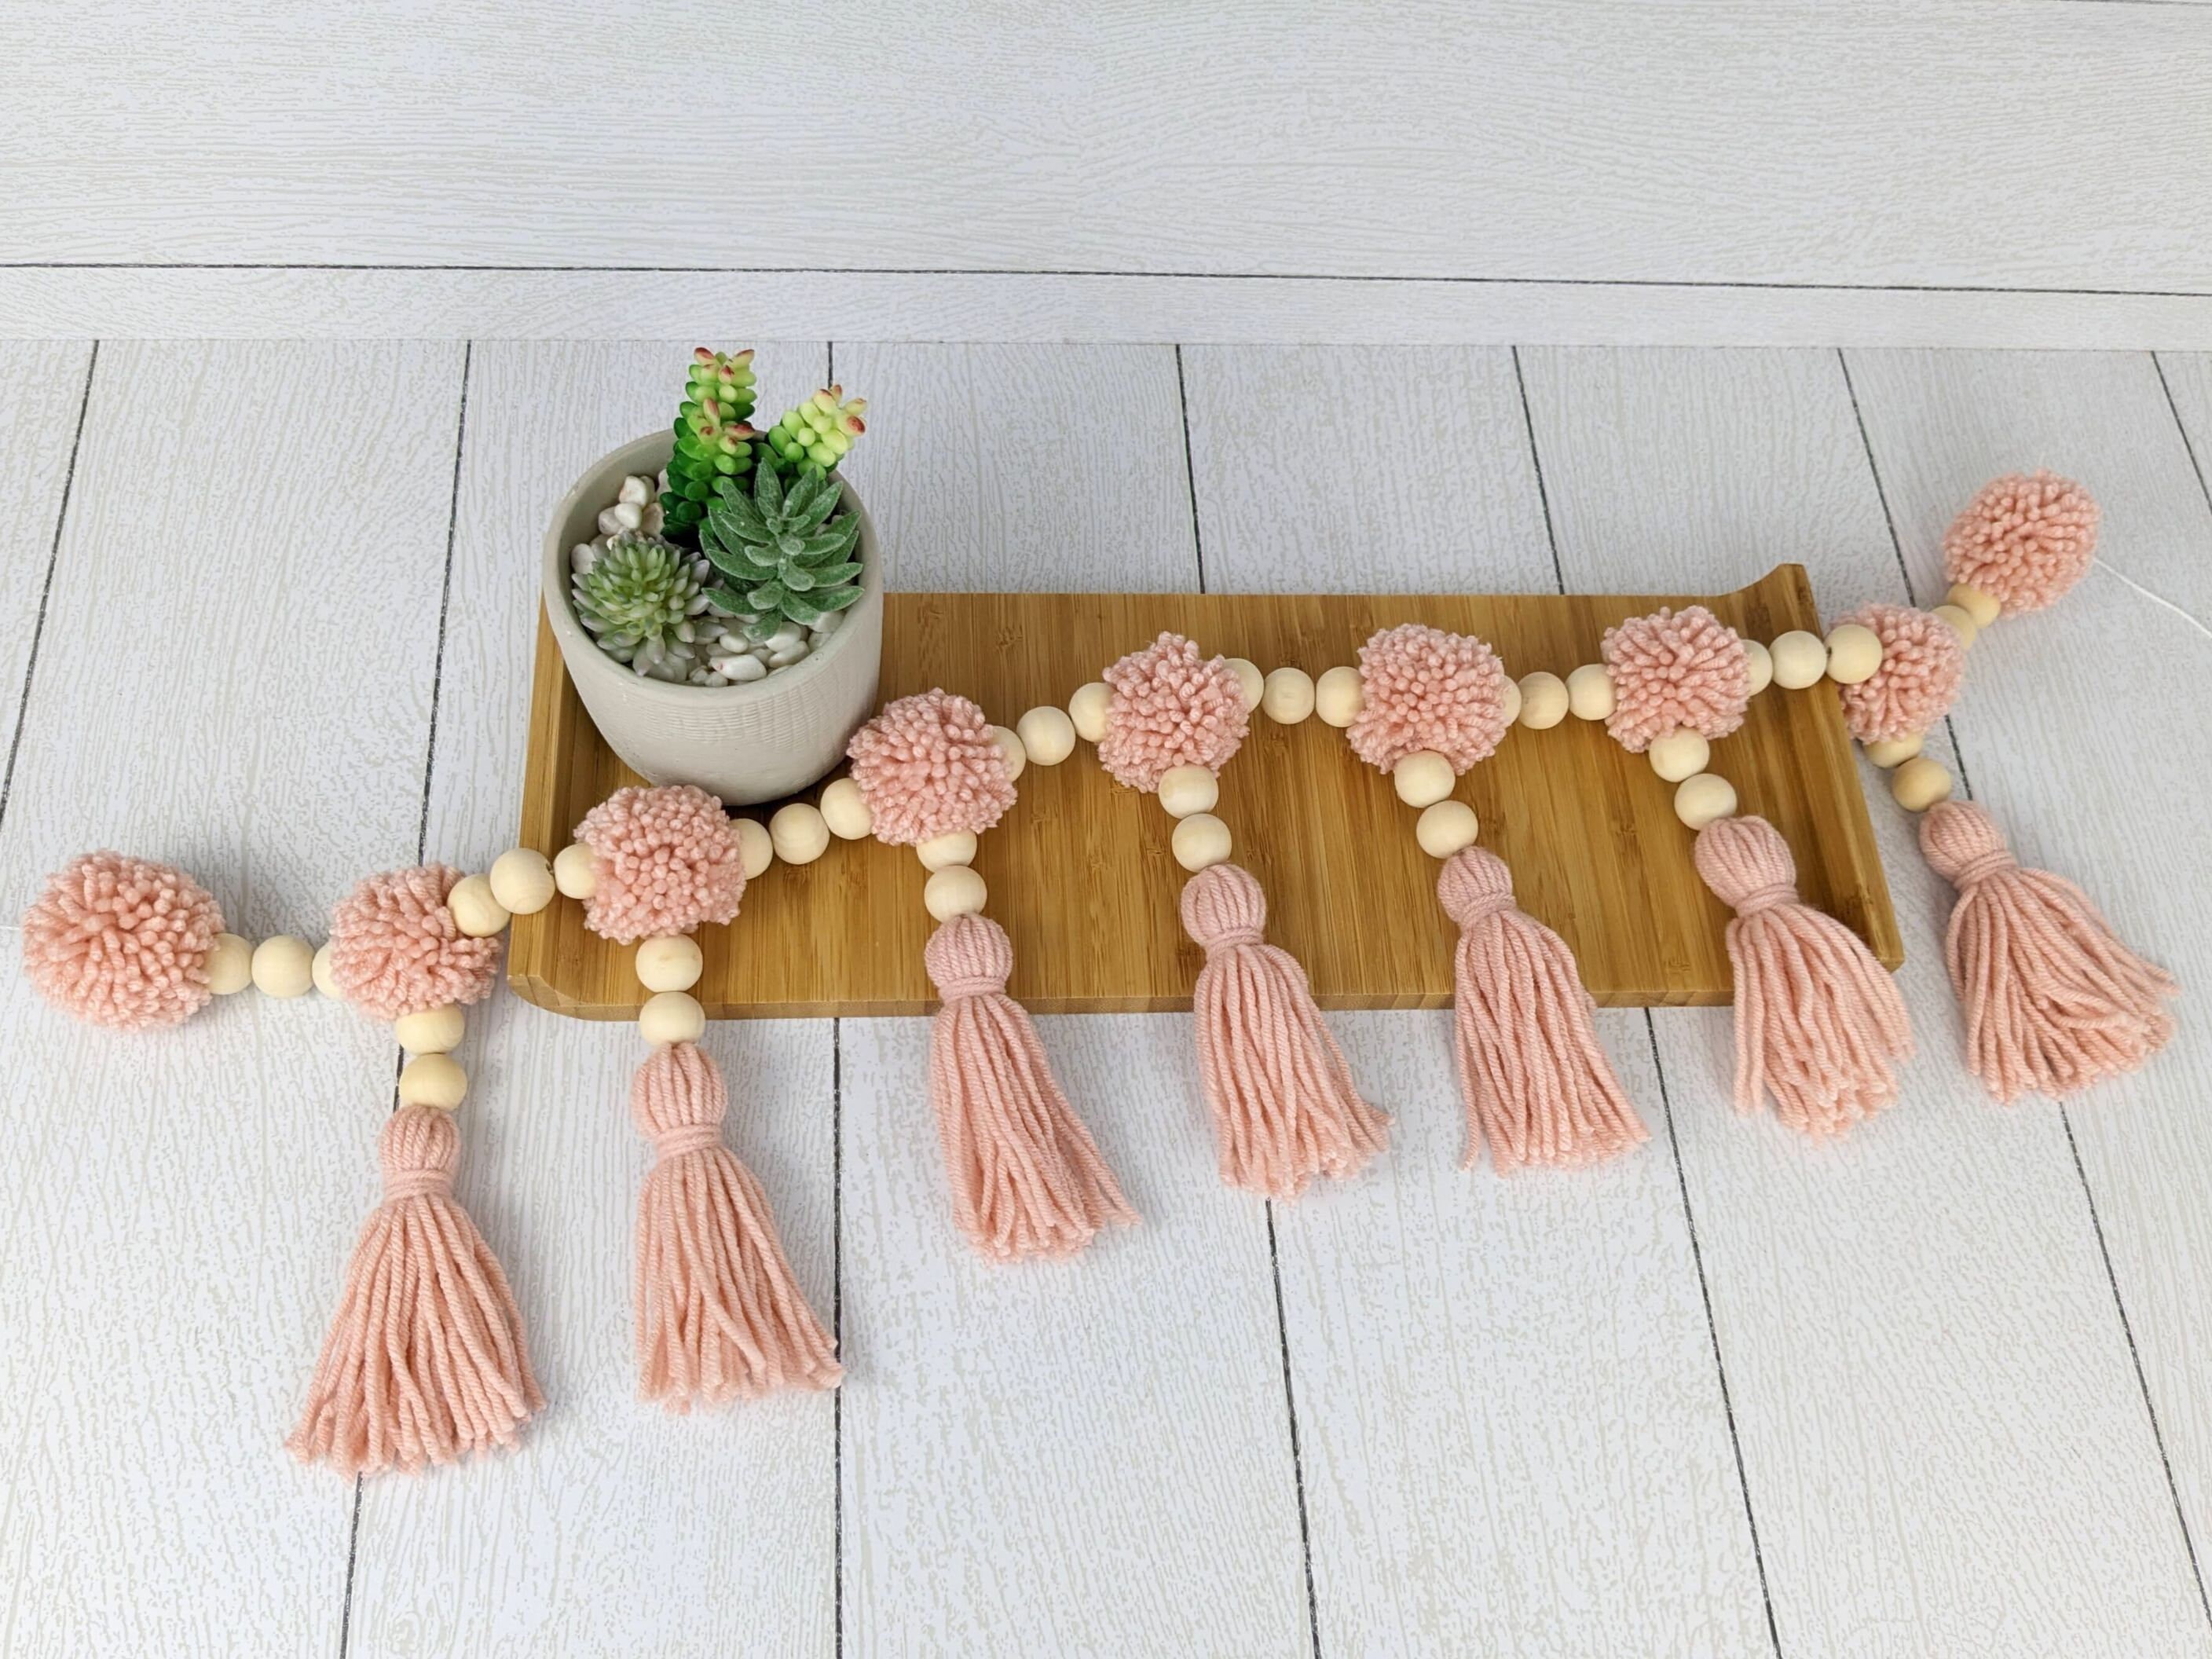 Pink and White Garland, Girl Nursery Ideas, Pom Pom Wall Hanging, Yarn Poms,  Expectant Mom Gift, Yarn Pom Pom Garland, Baby Shower Garland 